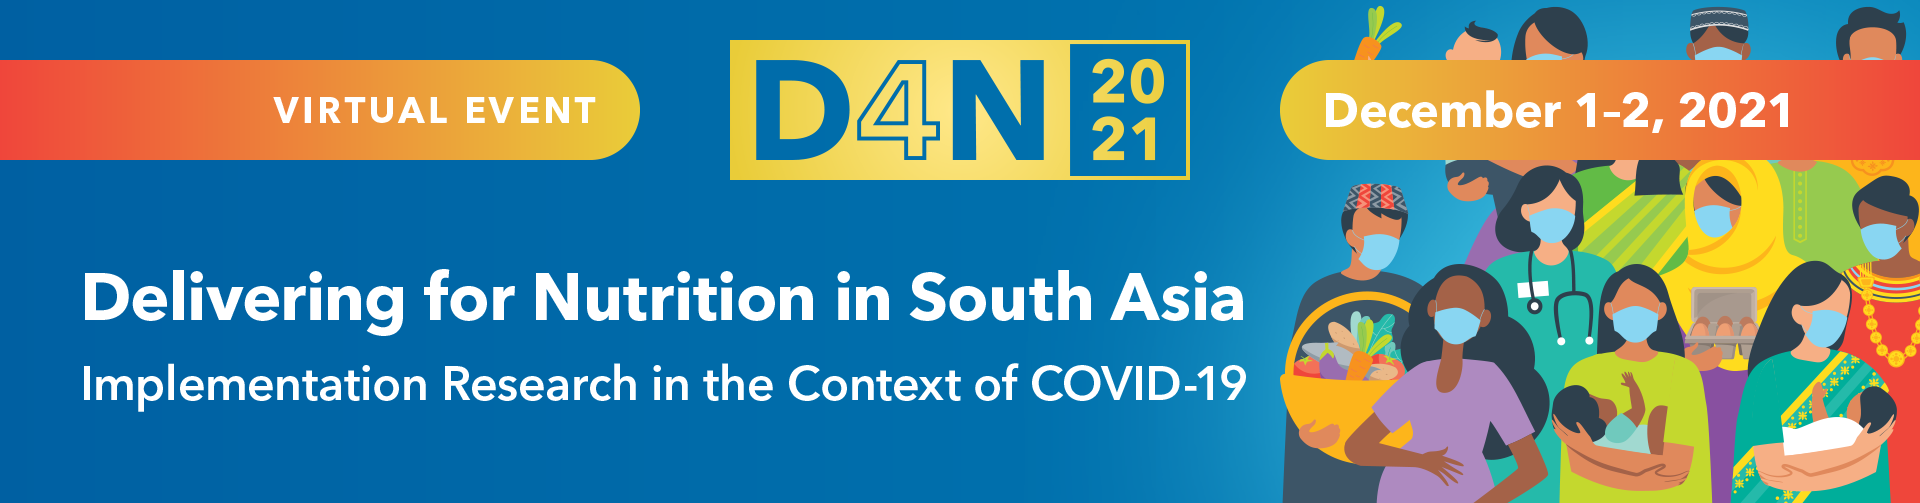 Delivering for Nutrition in South Asia: Call for Abstracts